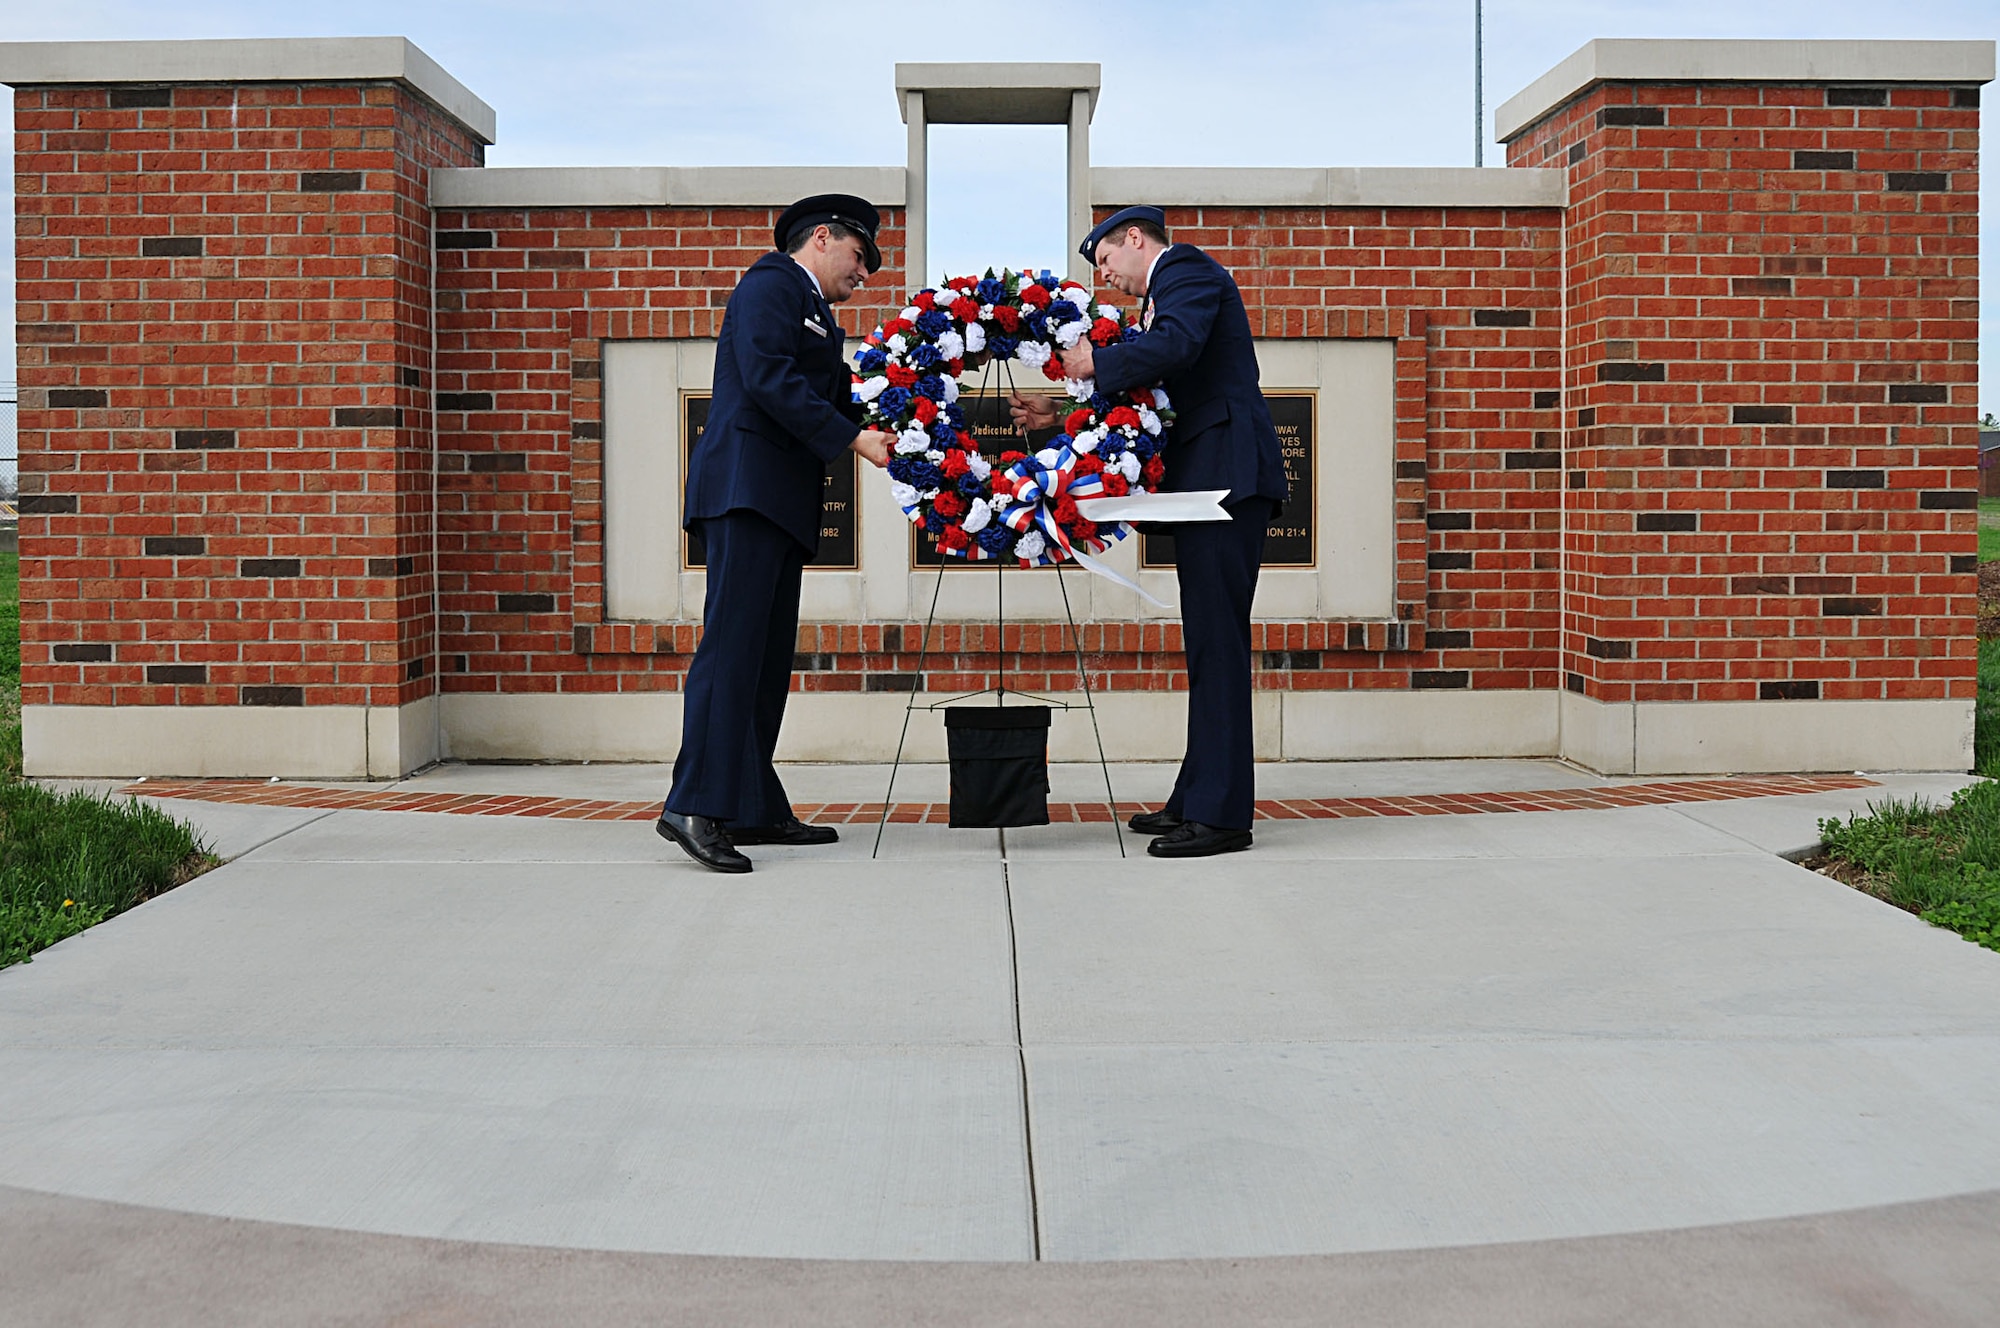 Col. Pete Nezamis (left), Commander, 126th Air Refueling Wing, and Lt. Col. Leslie Summers, a chaplain assigned to the 126th Air Refueling Wing, place a wreath in front of a memorial at Scott AFB, Ill., on March 19, 2012. A ceremony was held to commemorate the four 126th Air Refueling Wing aircrew members who perished in an aircraft accident 30 years ago. Maj. William S. Dixon, Jr., Capt. Kenneth L. Herrick, Capt. Robert J. Nicosia and Master Sgt. Richard A. Crome were aboard a Illinois National Guard KC-135A Stratotanker while on a routine training mission when their plane exploded near Greenwood, Ill. In addition, 23 members of the 928th Tactical Airlift Group, Air Force Reserves, who were passengers also lost their lives. (National Guard photo by Master Sgt. Ken Stephens)